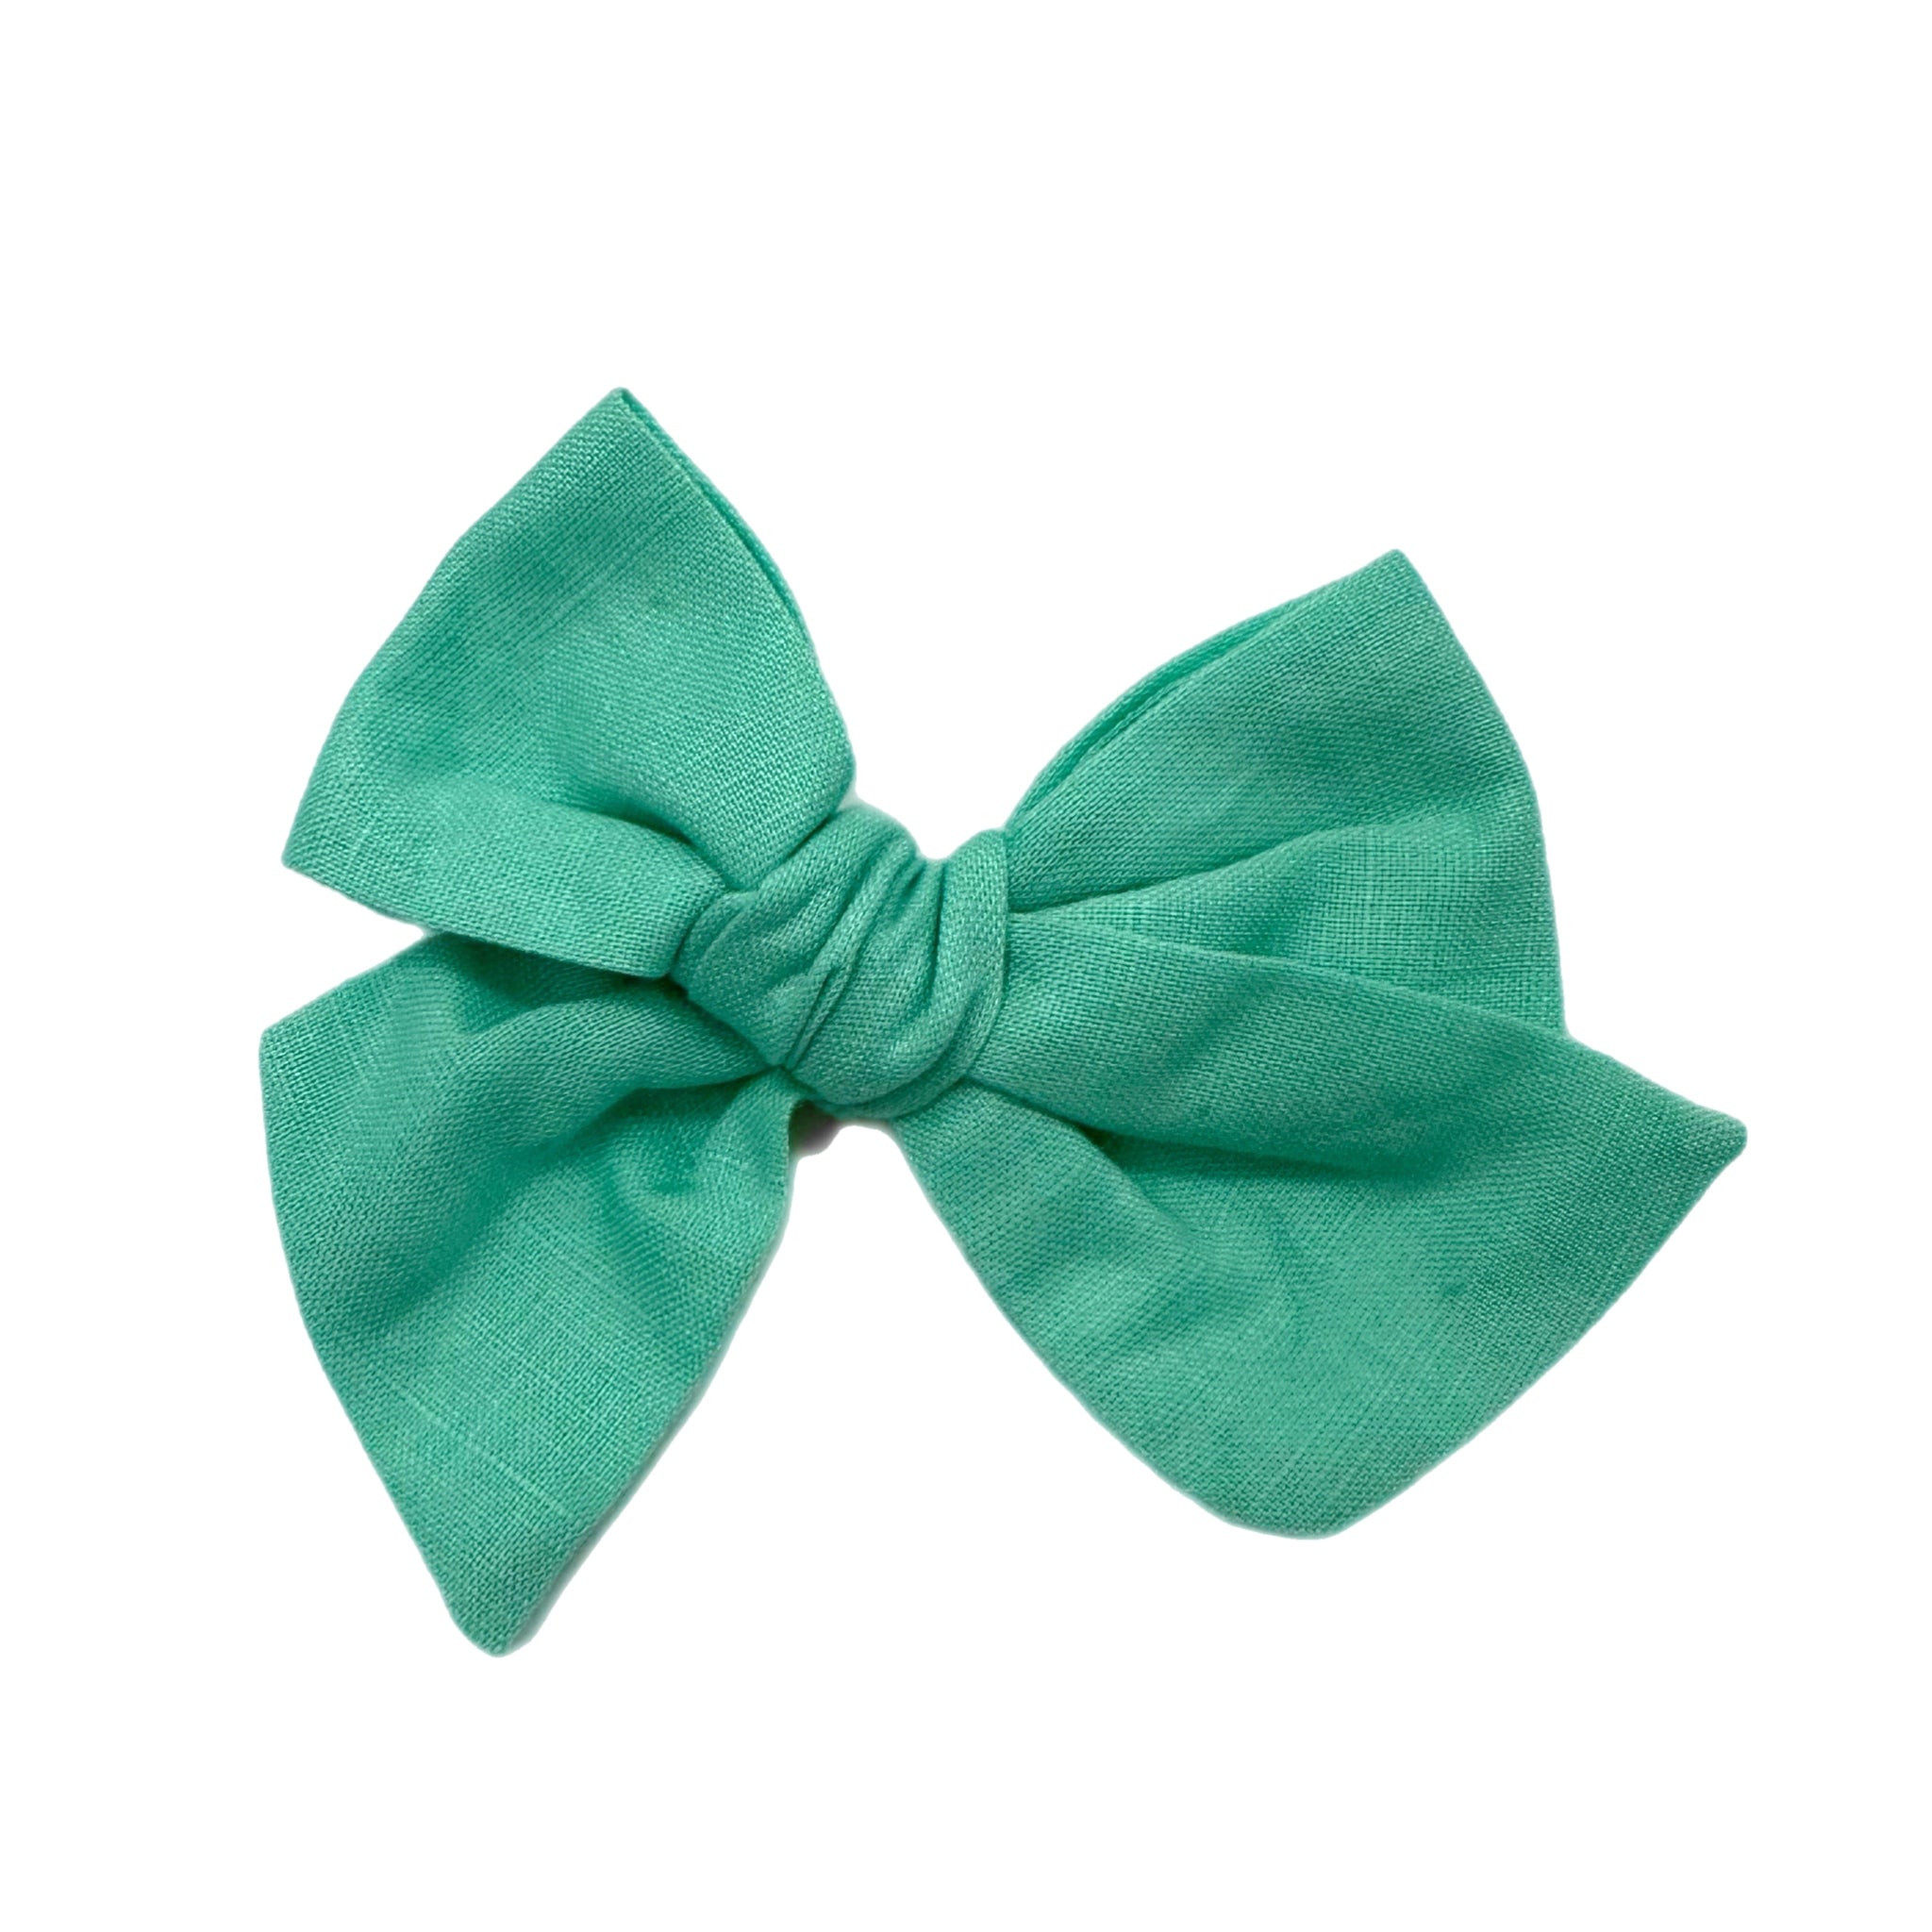 Mint Linen 5" Pre-Tied Fabric Bow